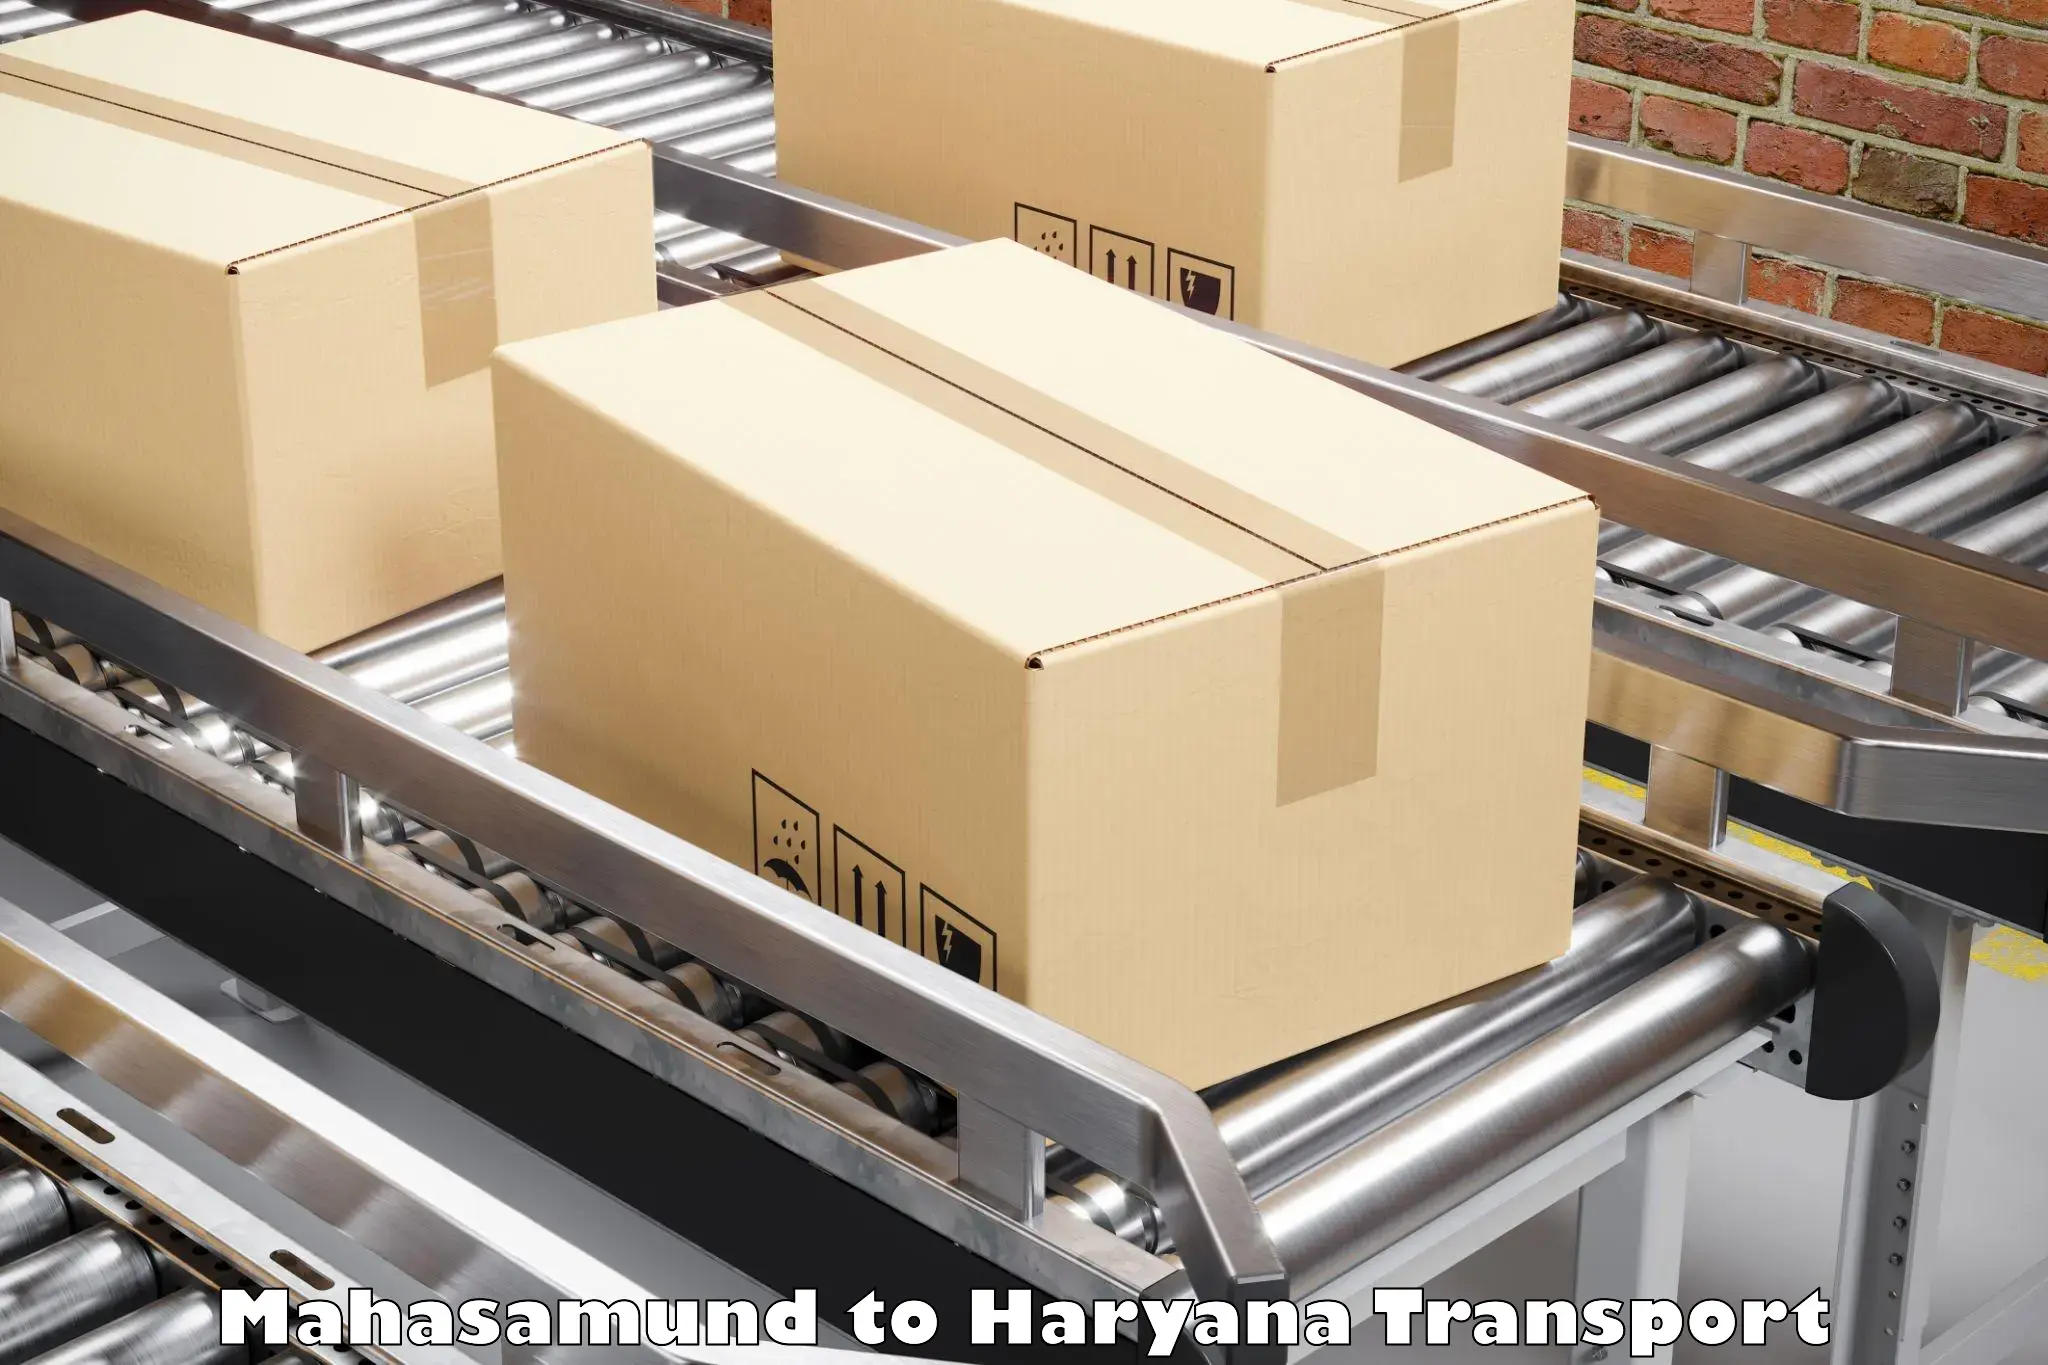 Delivery service Mahasamund to Haryana